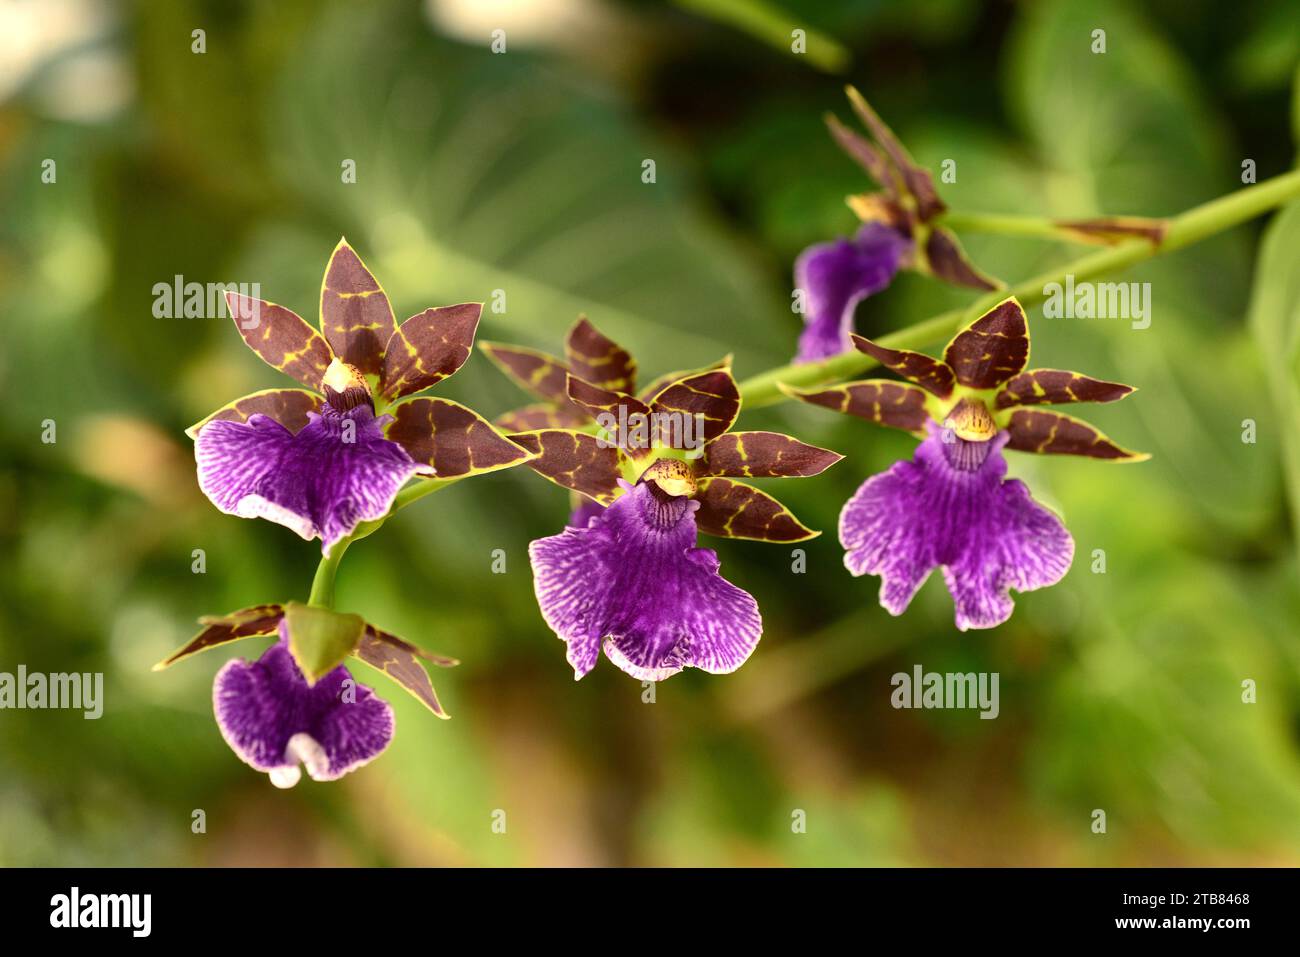 Zygopetalum sp. is a orchids genera native to South America. Stock Photo